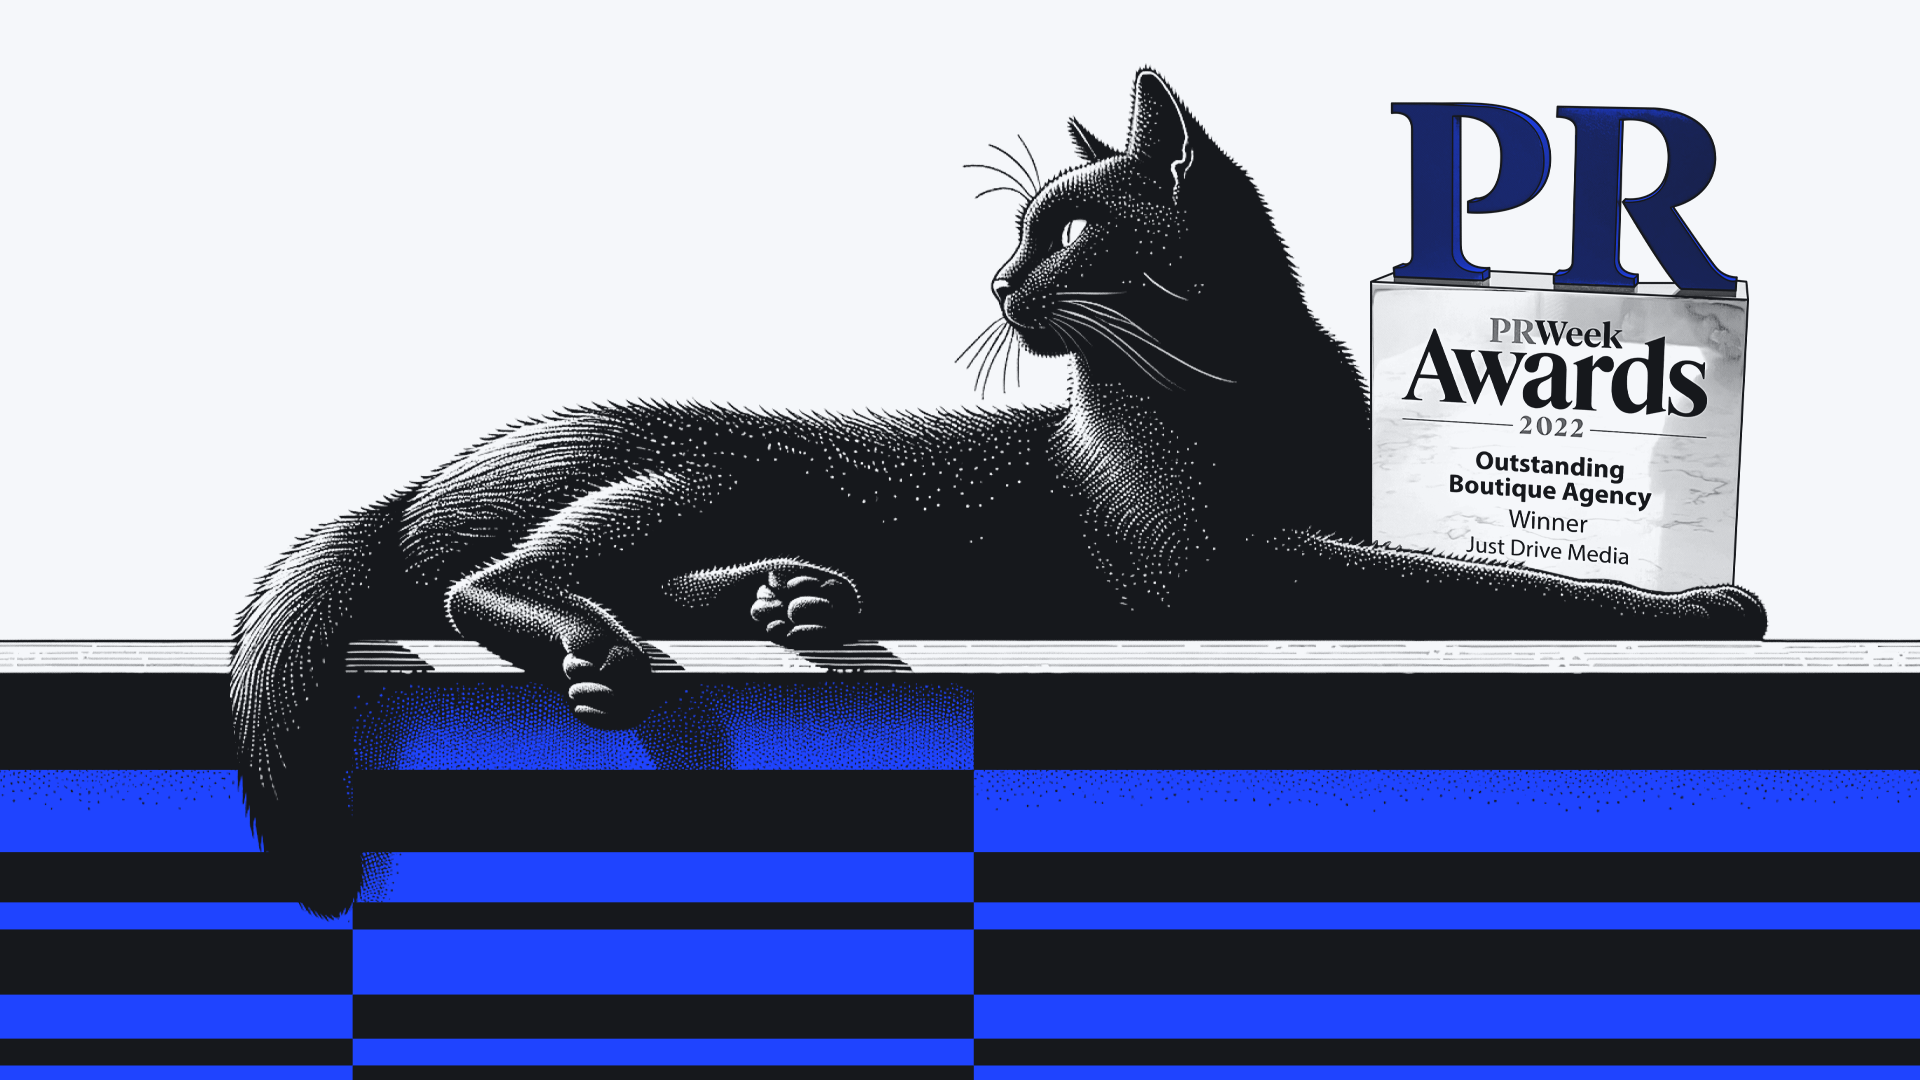 A stylized black cat reclines next to a PRWeek Award for Outstanding Boutique Agency.